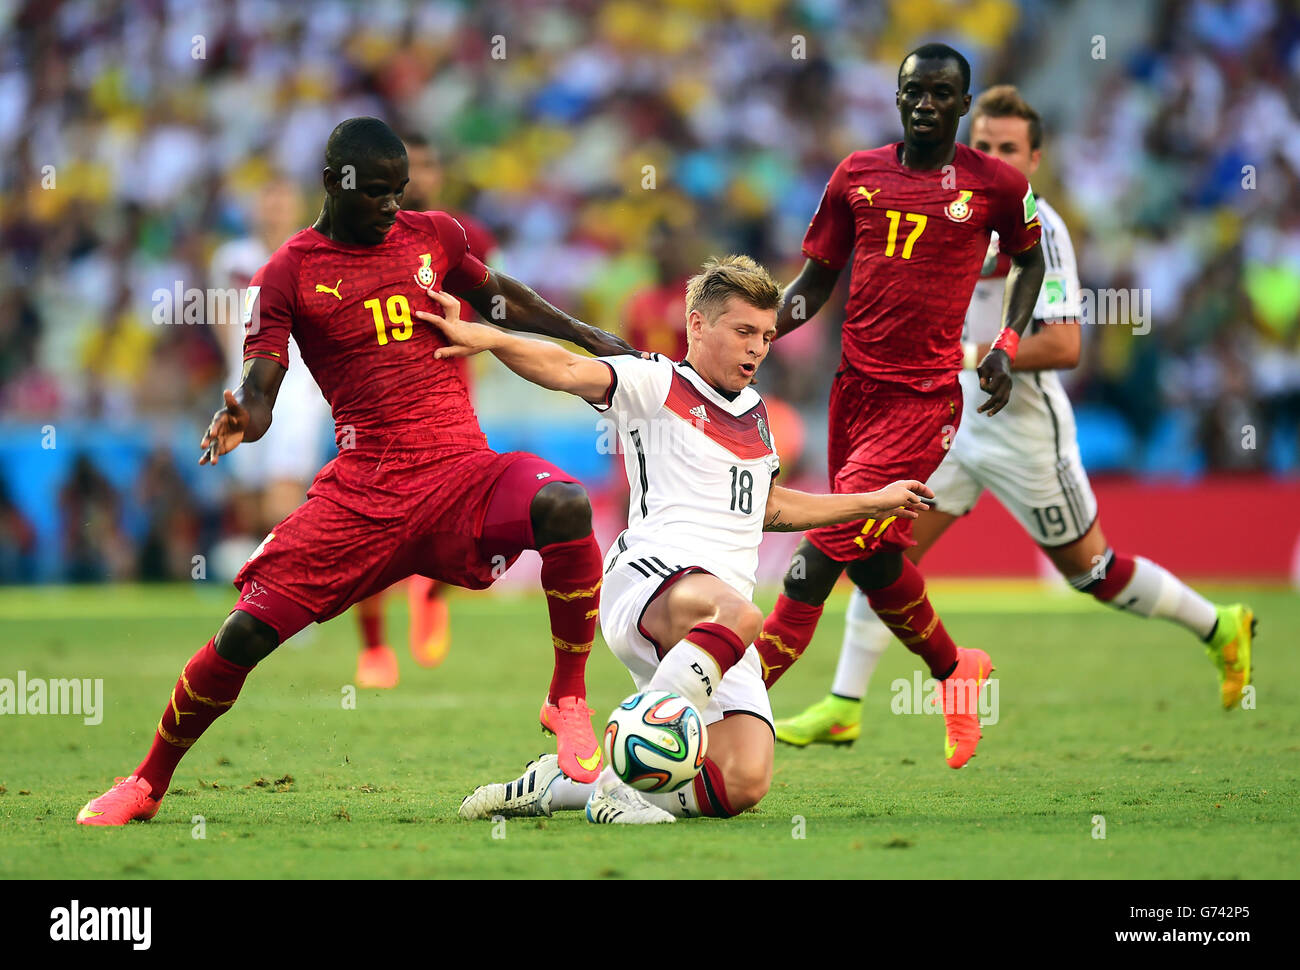 Germany's Toni Kroos is tackled by Ghana's Jonathan Mensah (left) as Ghana's Mohammed Rabiu (right) looks on Stock Photo